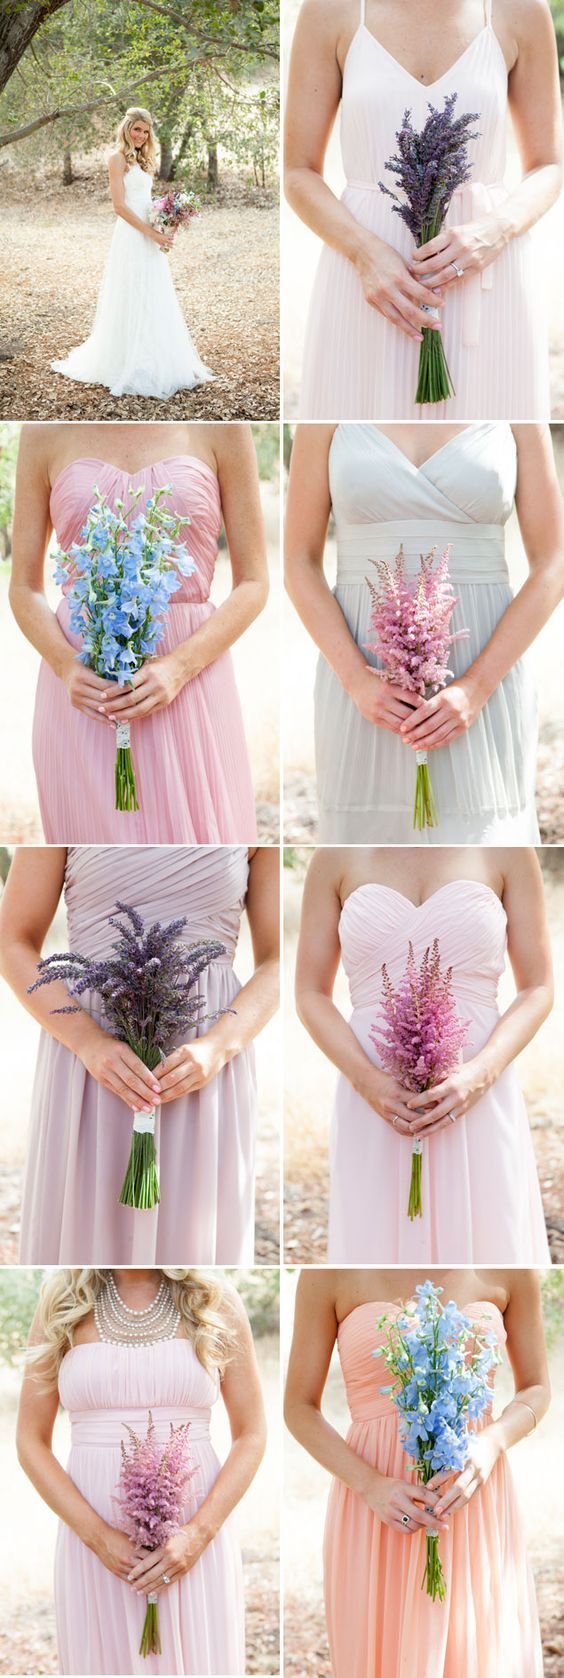 Small wedding bouquets for spring summer weddings 49